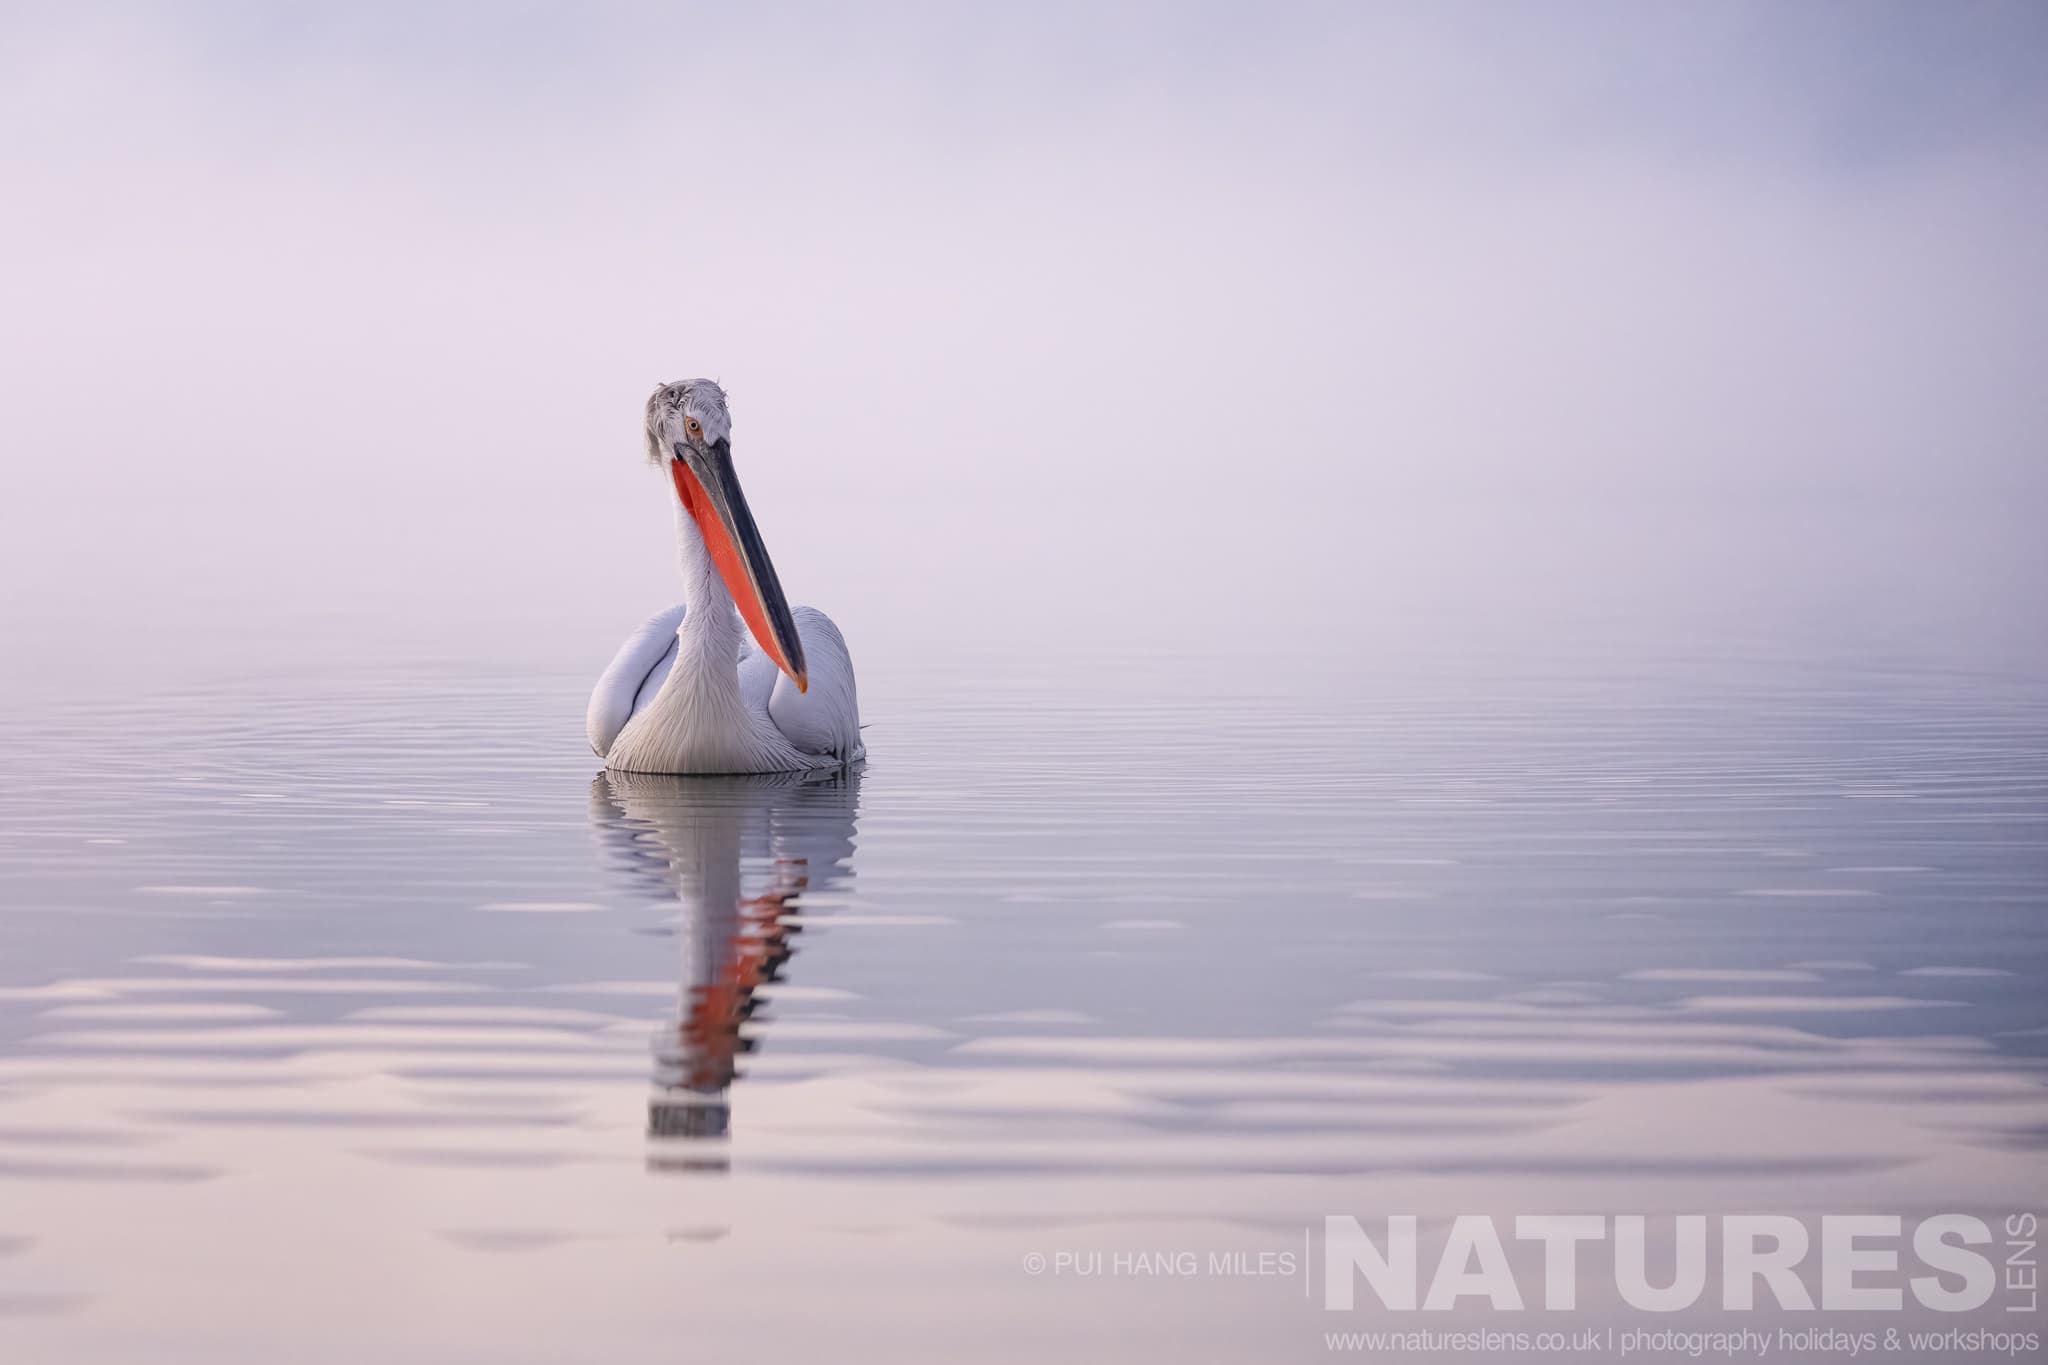 One of the Dalmatian Pelicans of Greece drifts on the waters of Lake Kerkini